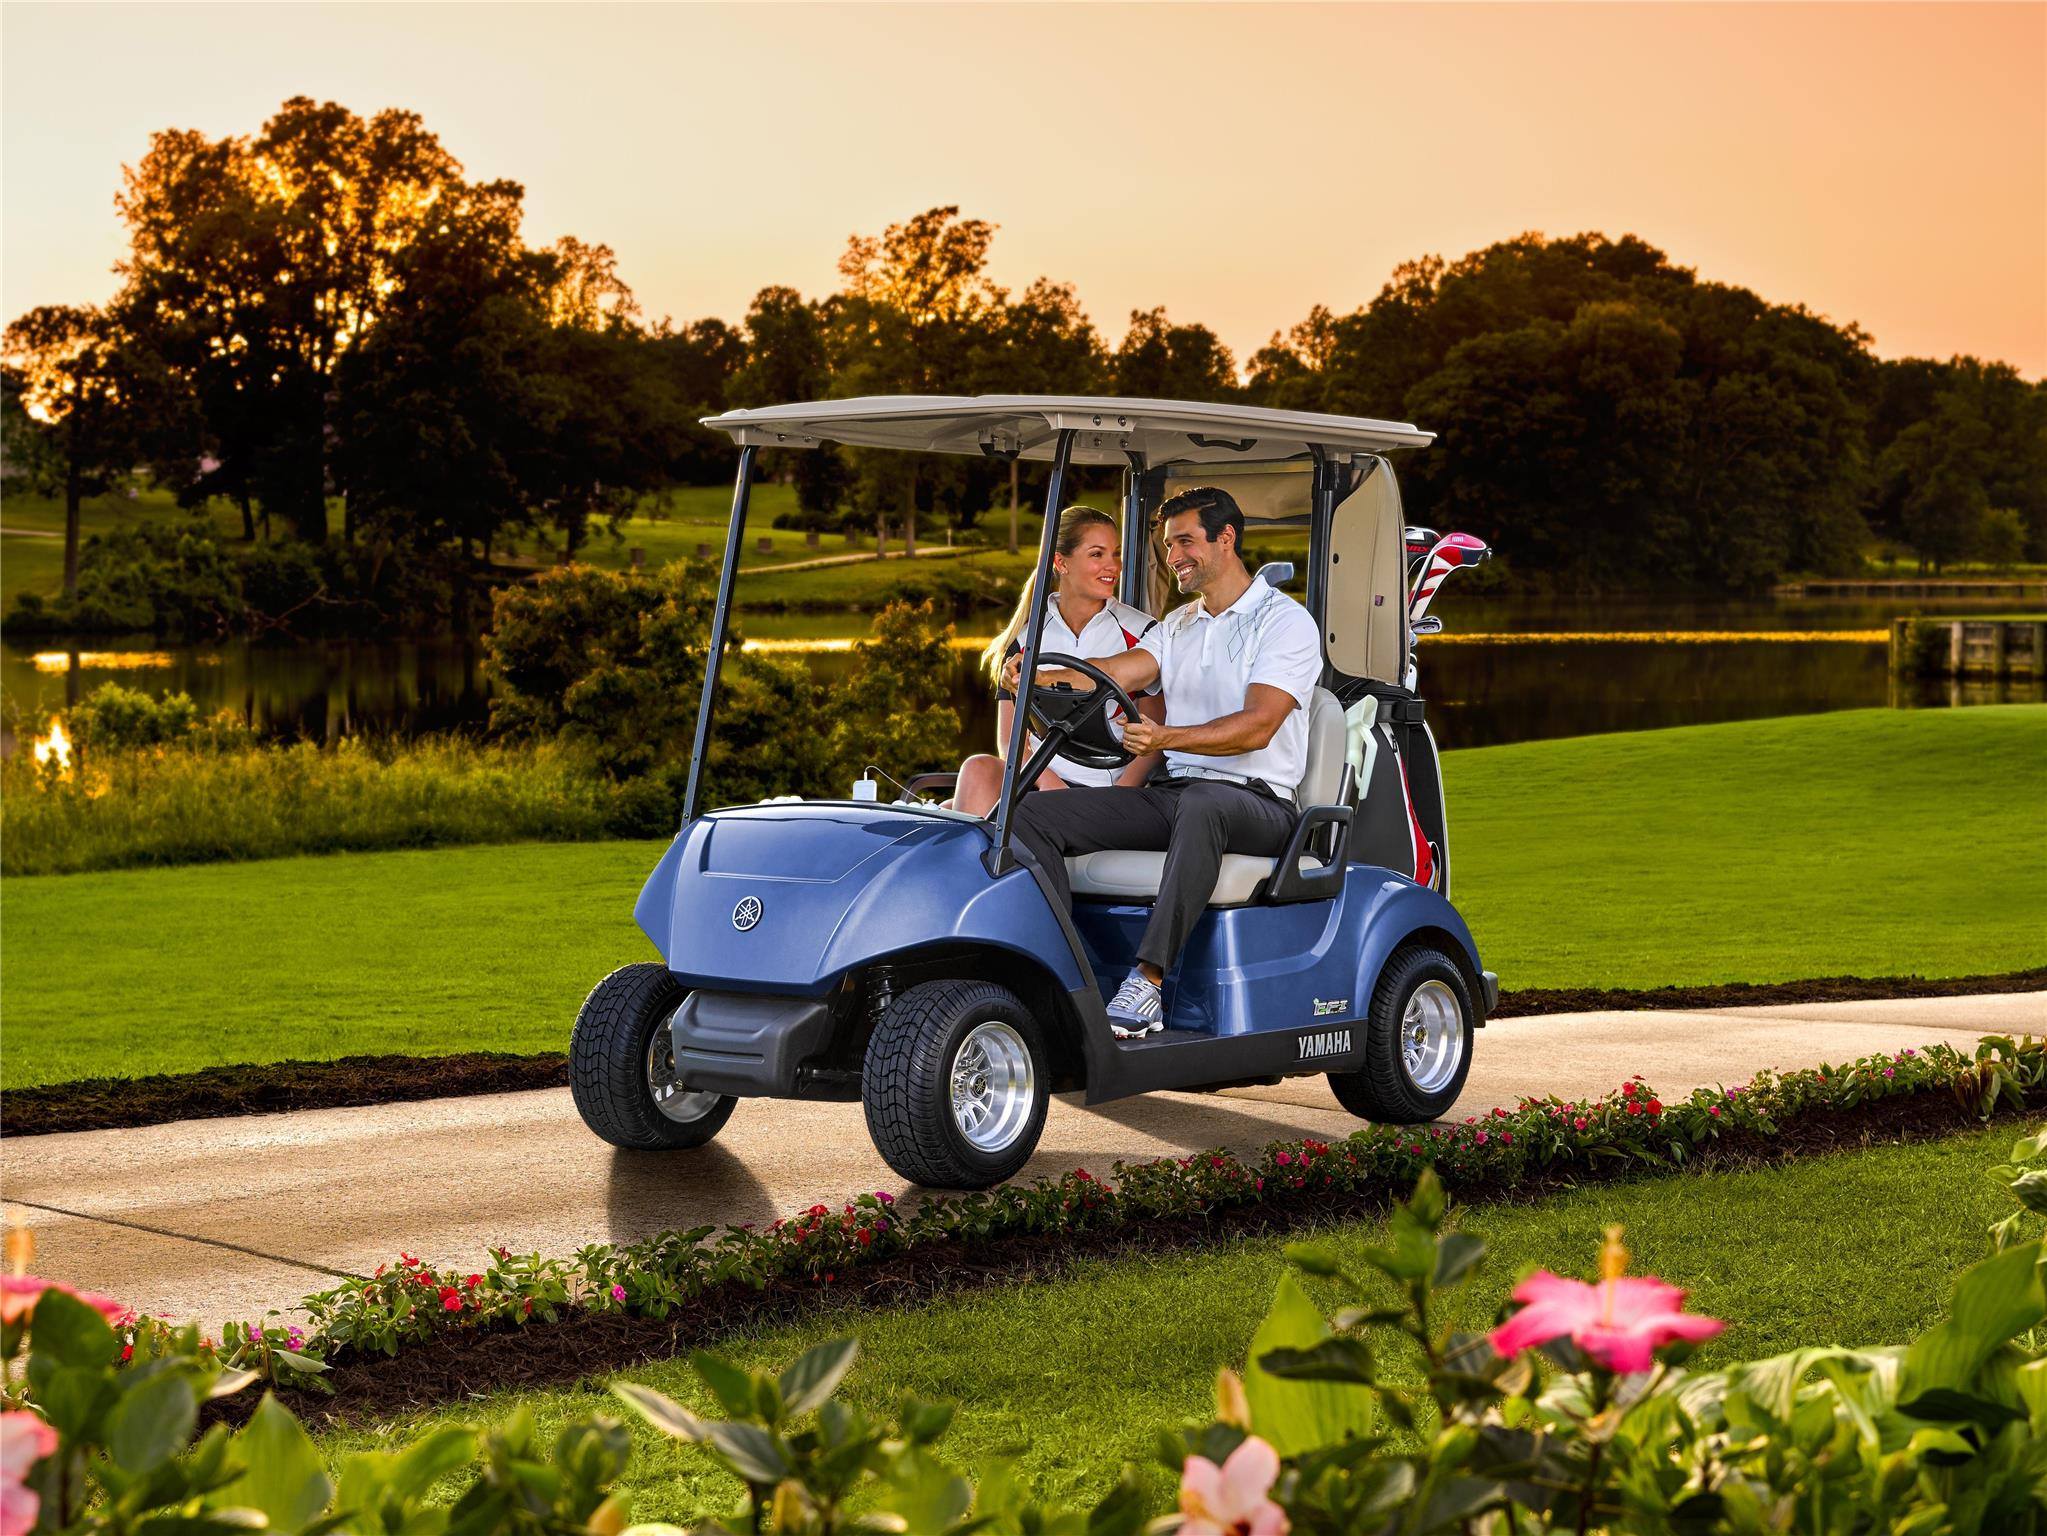 There are a lot more reasons to own a golf car, than just golf!